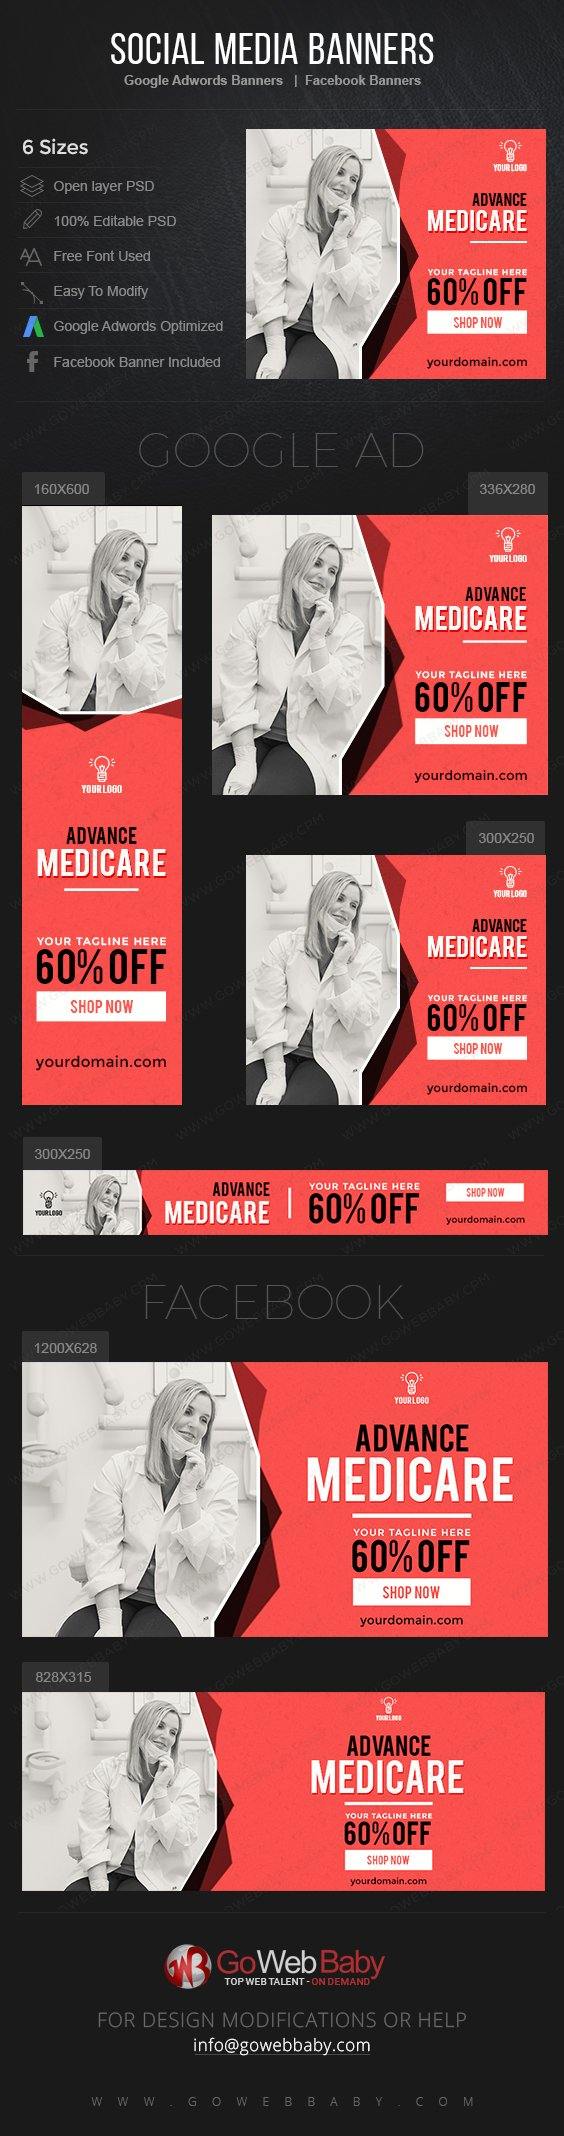 Google Adwords Display Banner with Facebook banners - Medicare For Website Marketing - GoWebBaby.Com